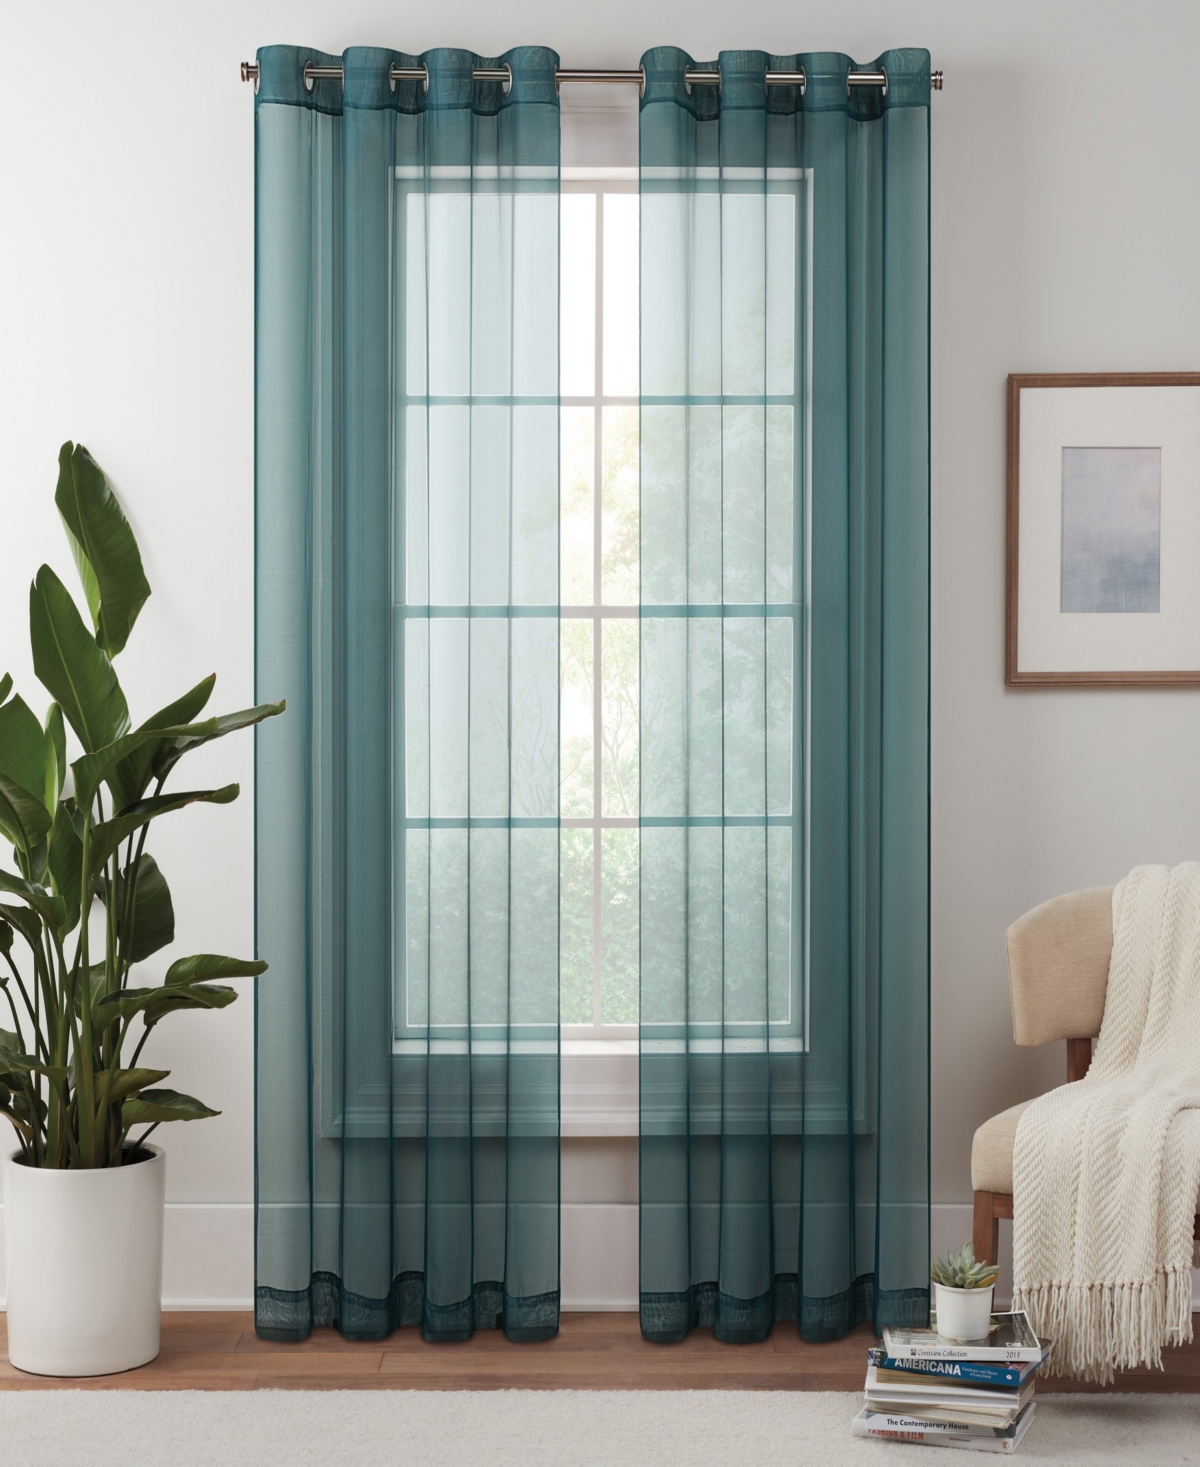 Eclipse Livia Sheer Voile Grommet Curtain Panel, 54" X 63" In Teal